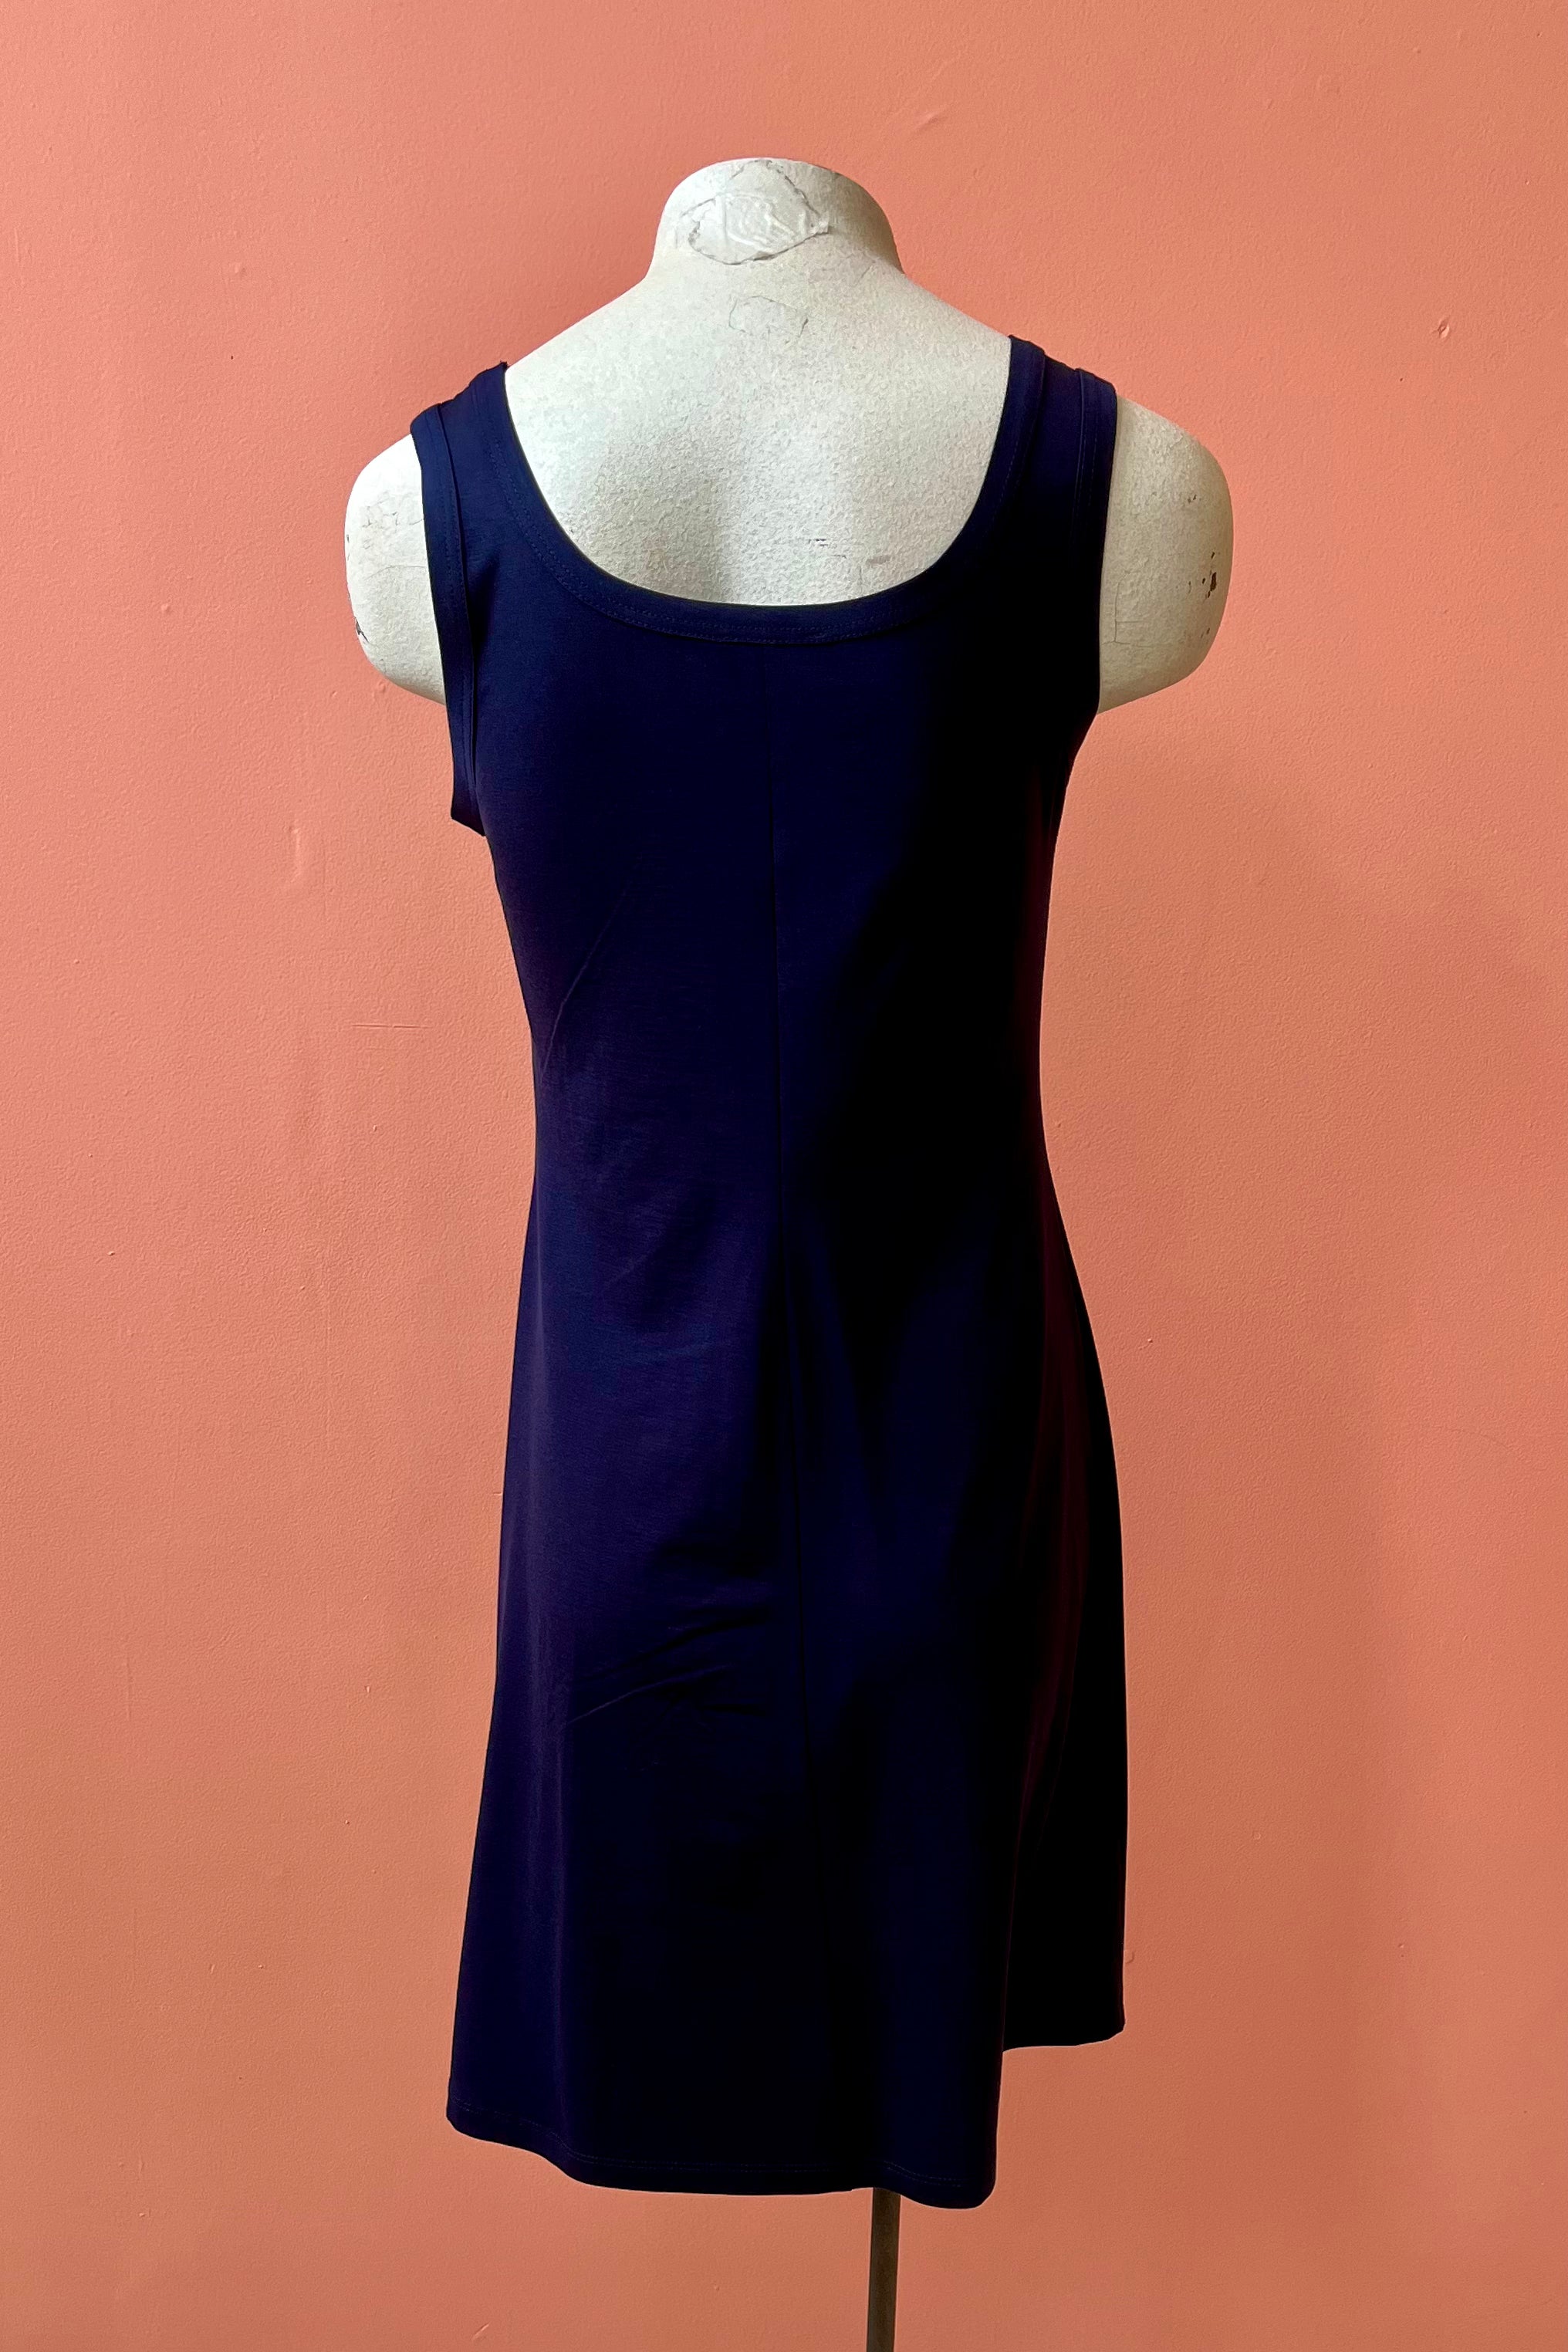 B-Dress by Yul Voy, Navy, back view, tank dress, wide straps, scoop neck front and back, A-line shape, above the knee, sizes XS to XXL, made in Montreal